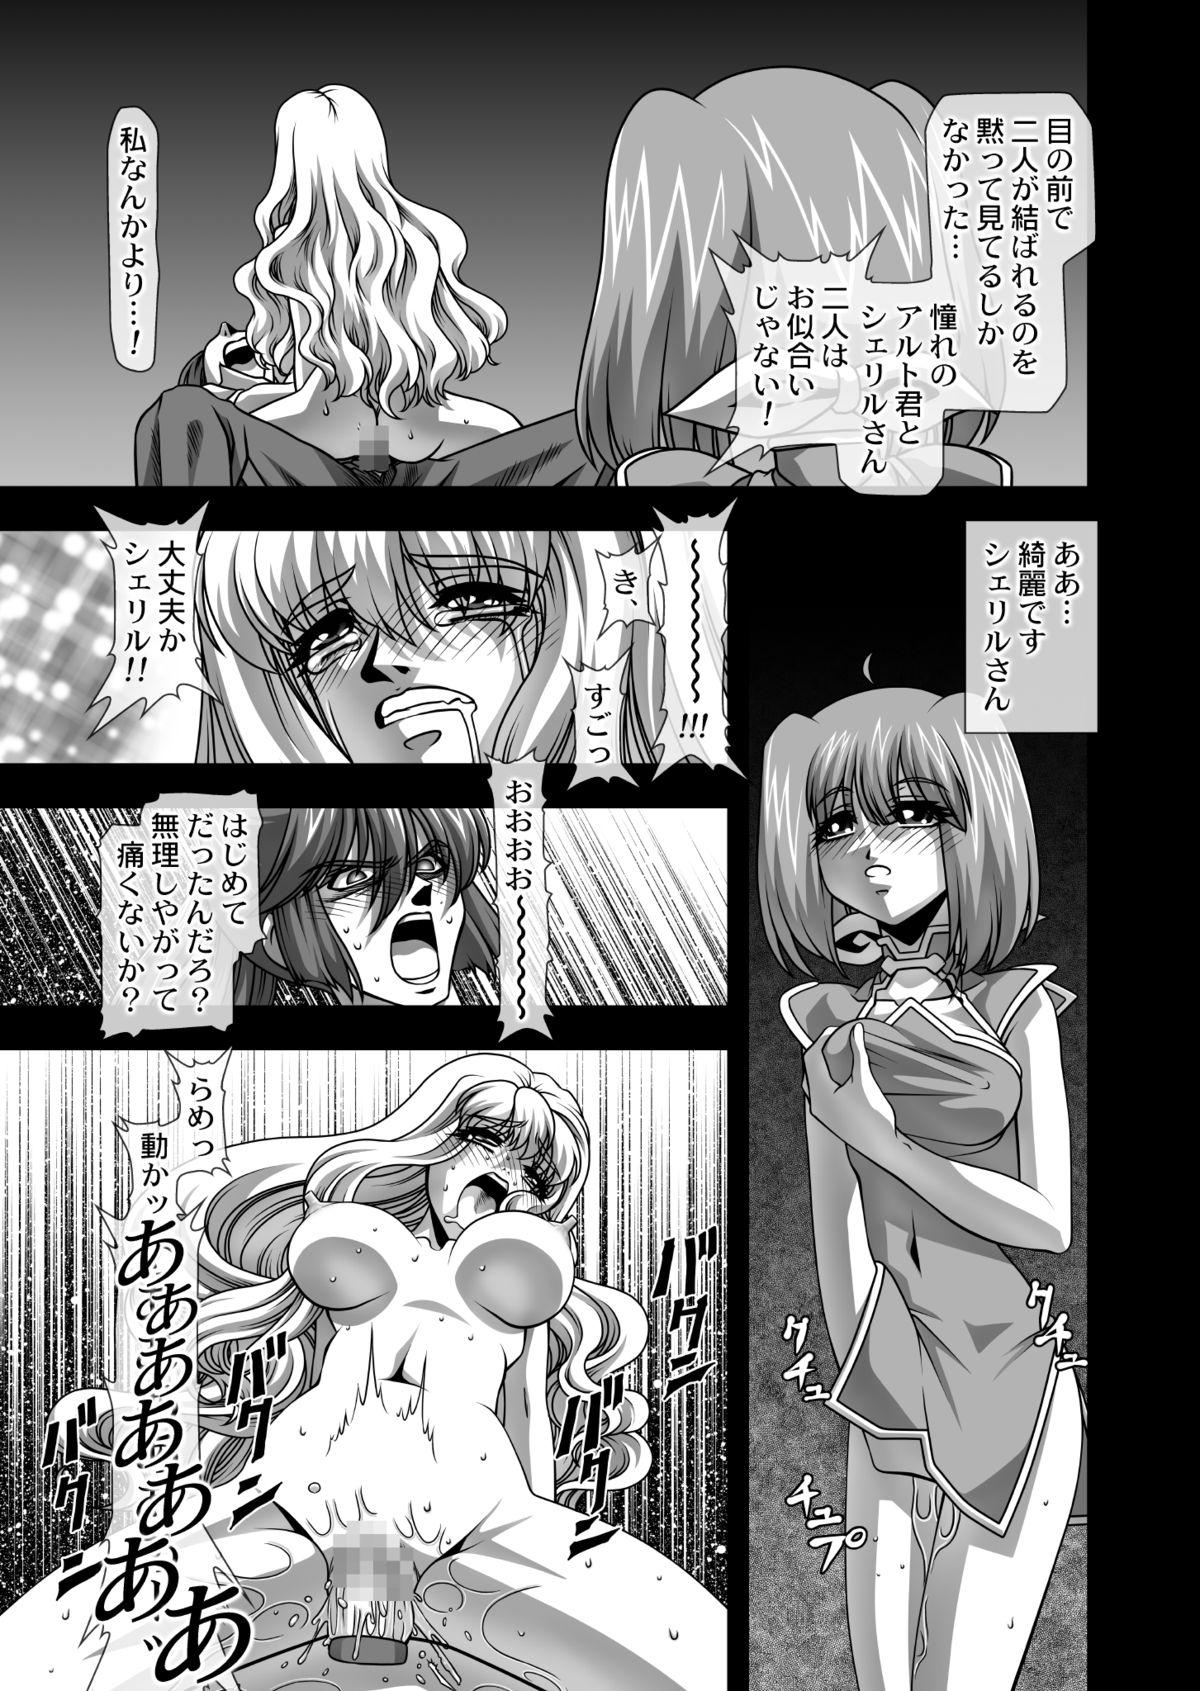 Fist Oppai Meister!! - Macross frontier Gay Clinic - Page 10